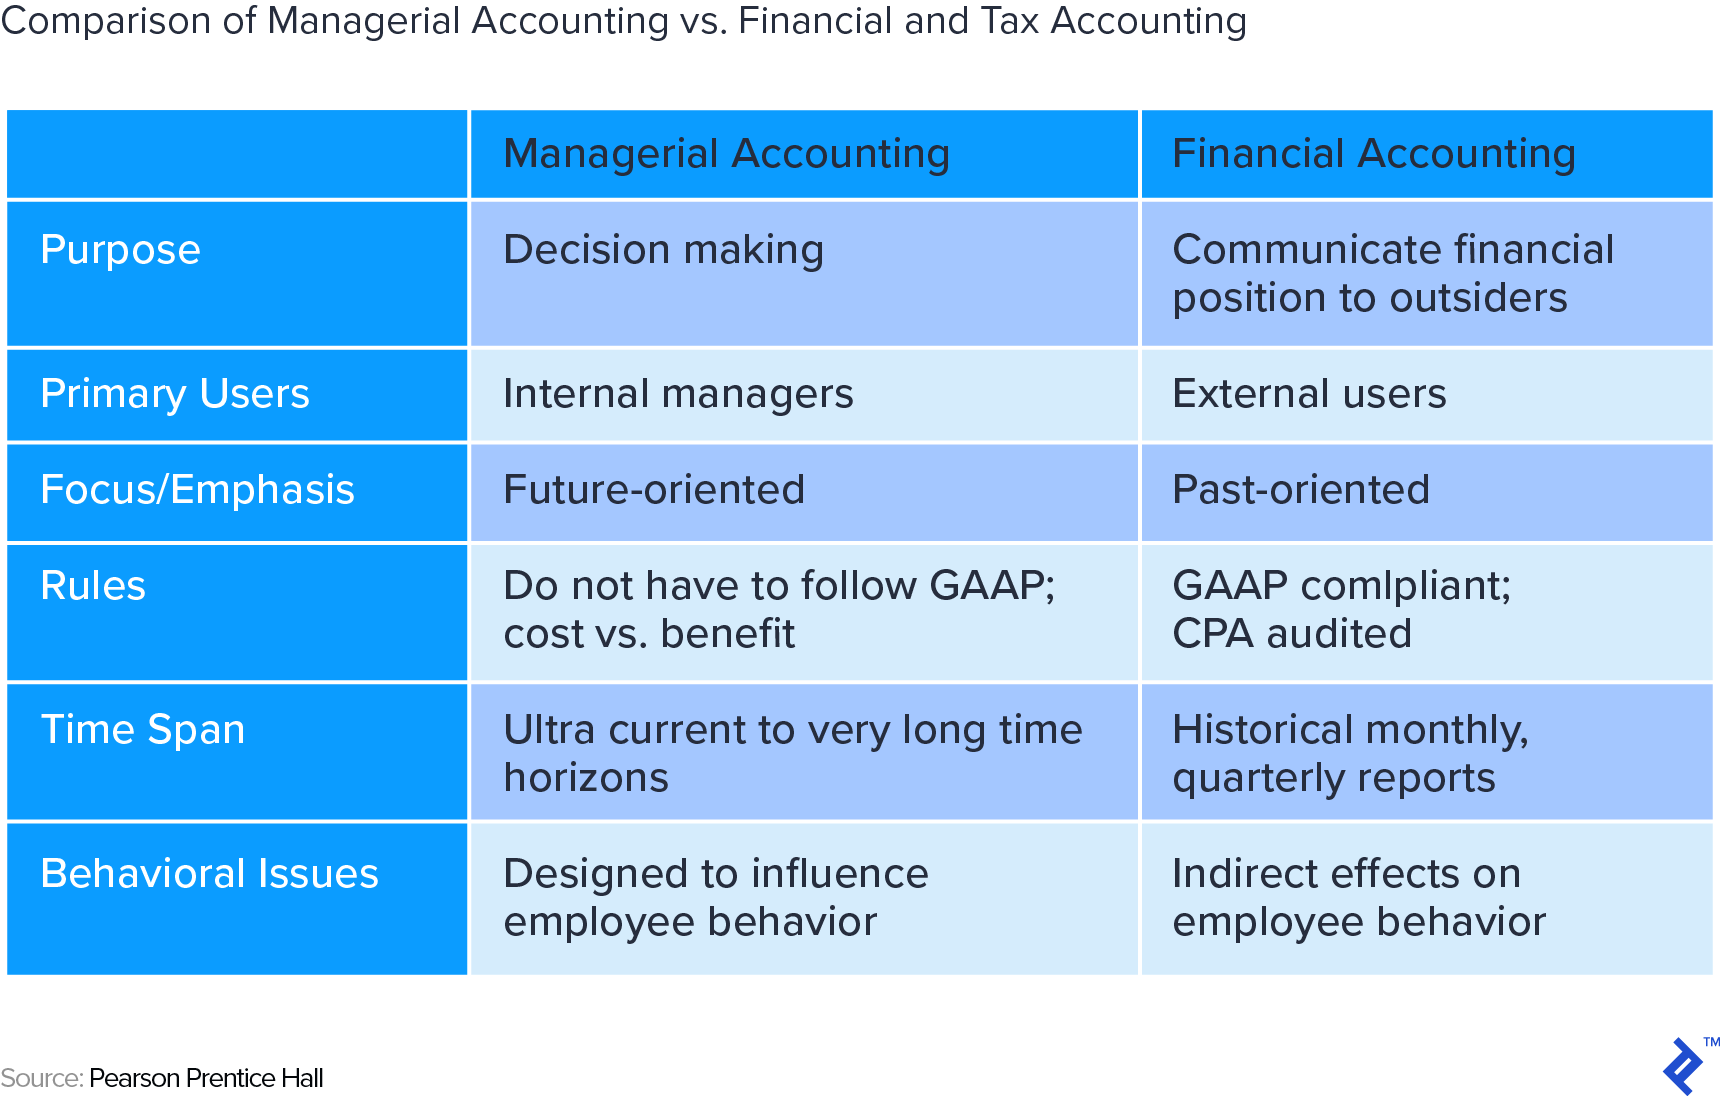 Comparison of managerial accounting versus financial and tax accounting